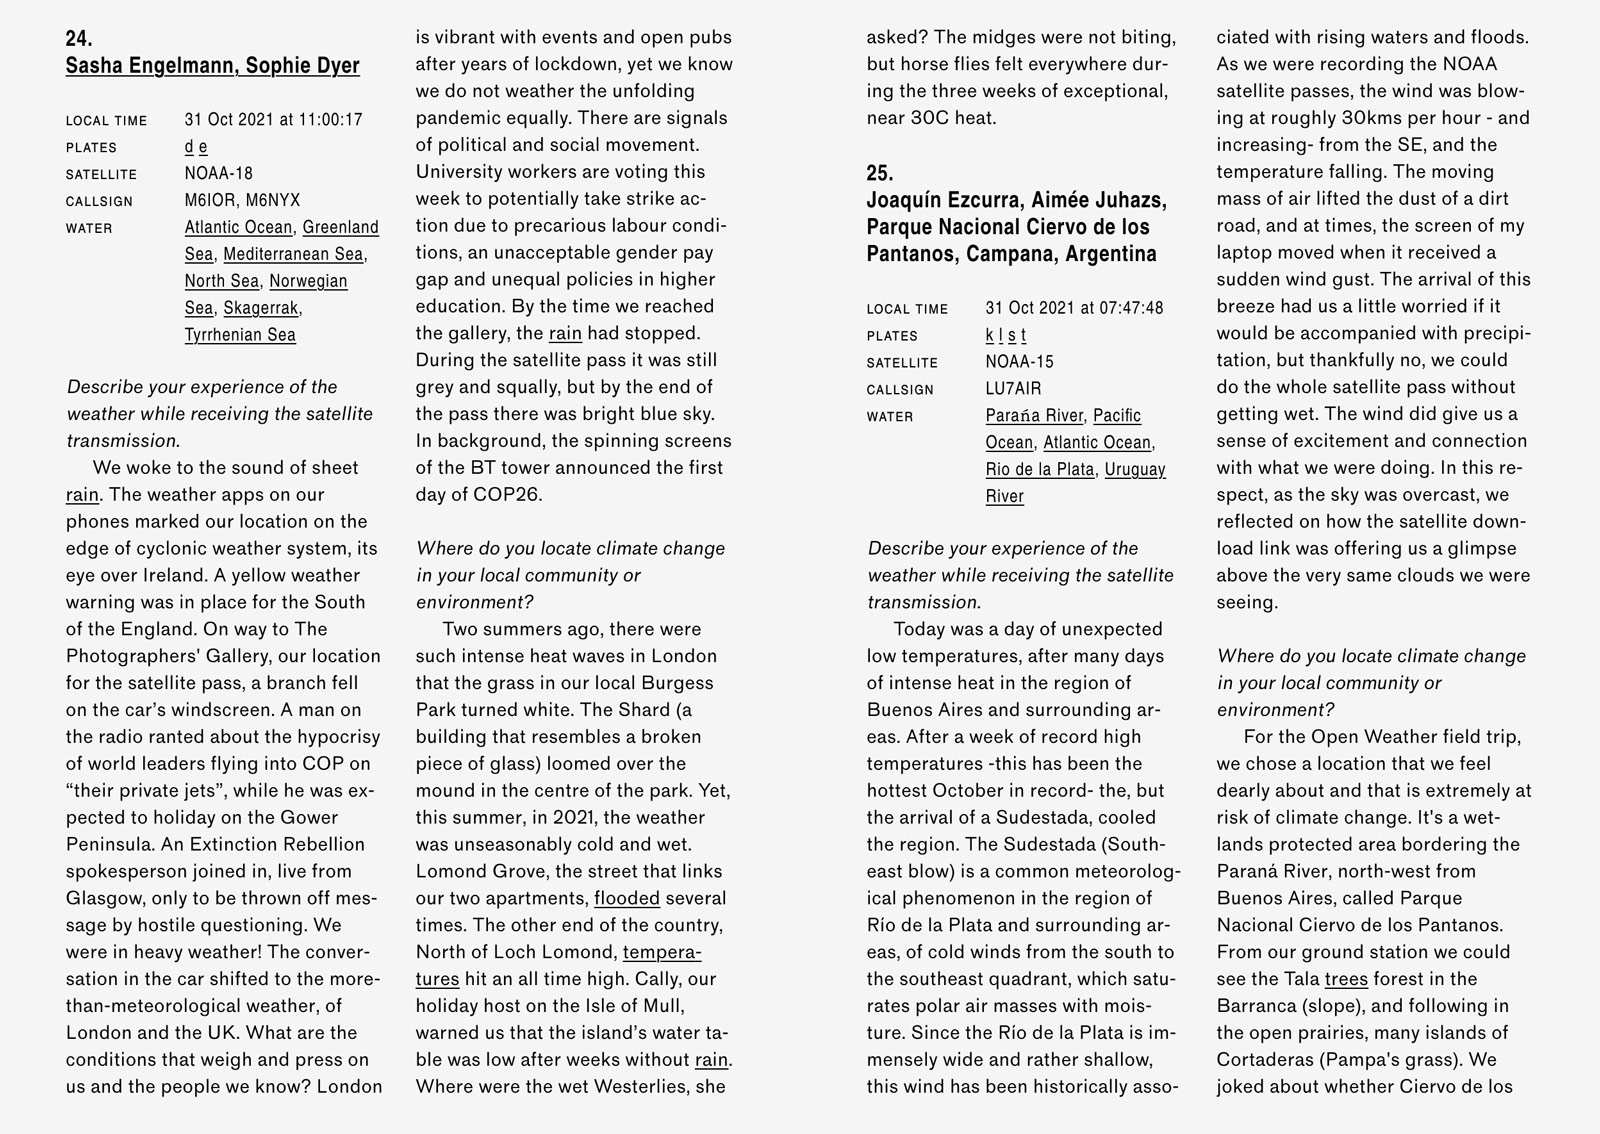 Open weather ebook interior spread showing Field Notes from multiple contributors in four columns of text.